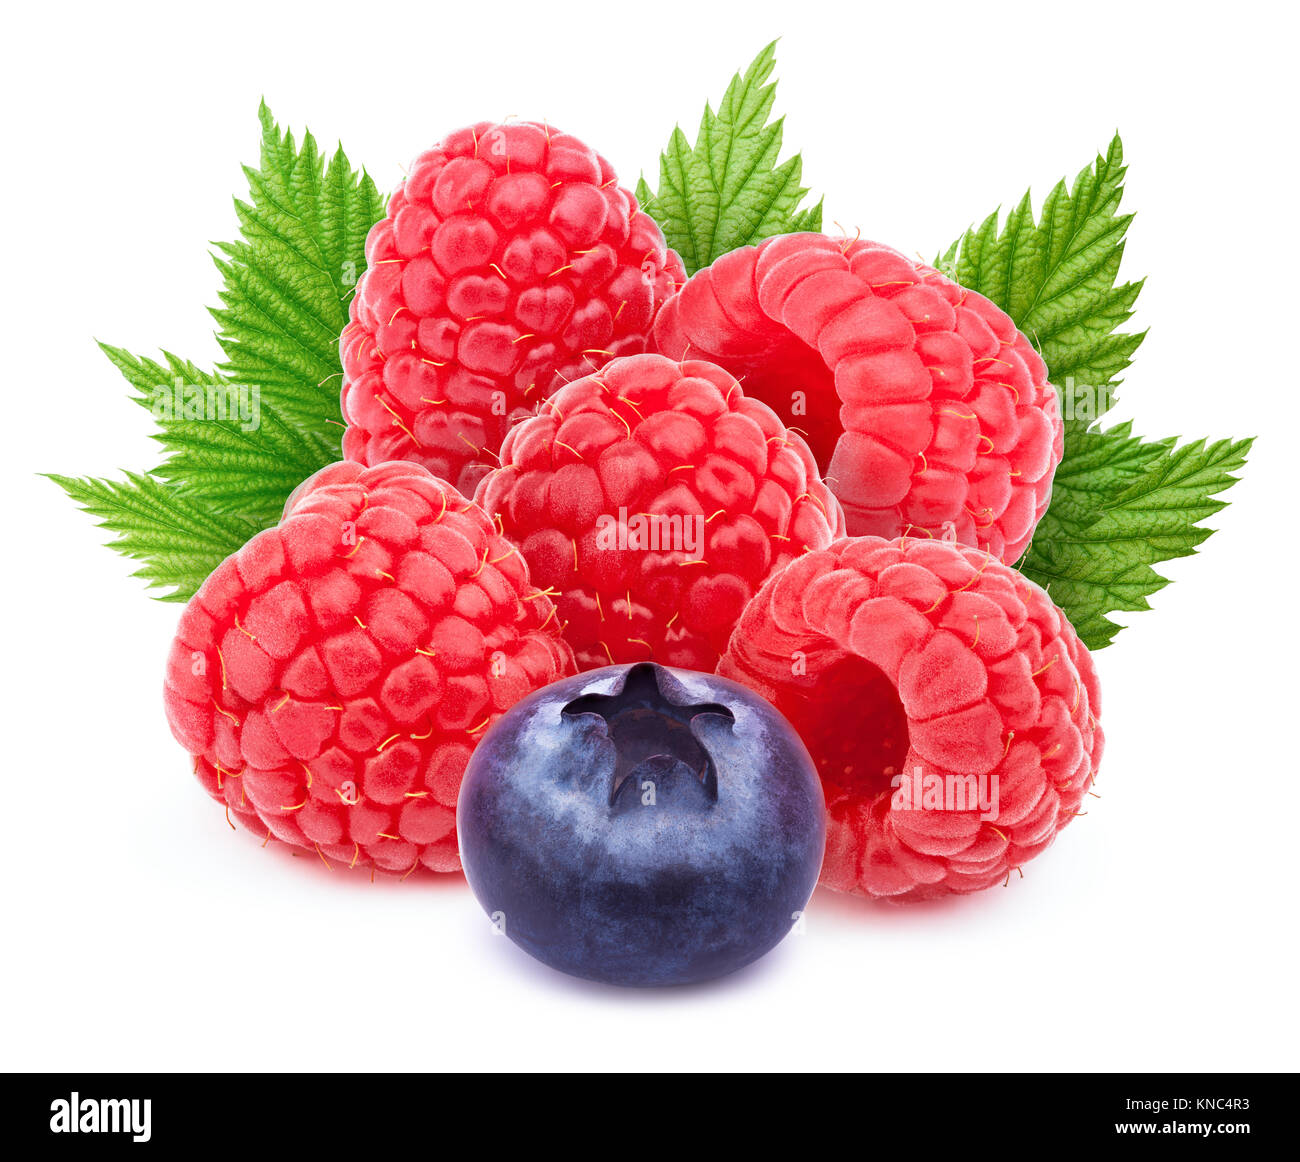 Five raspberries and one blueberry isolated Stock Photo